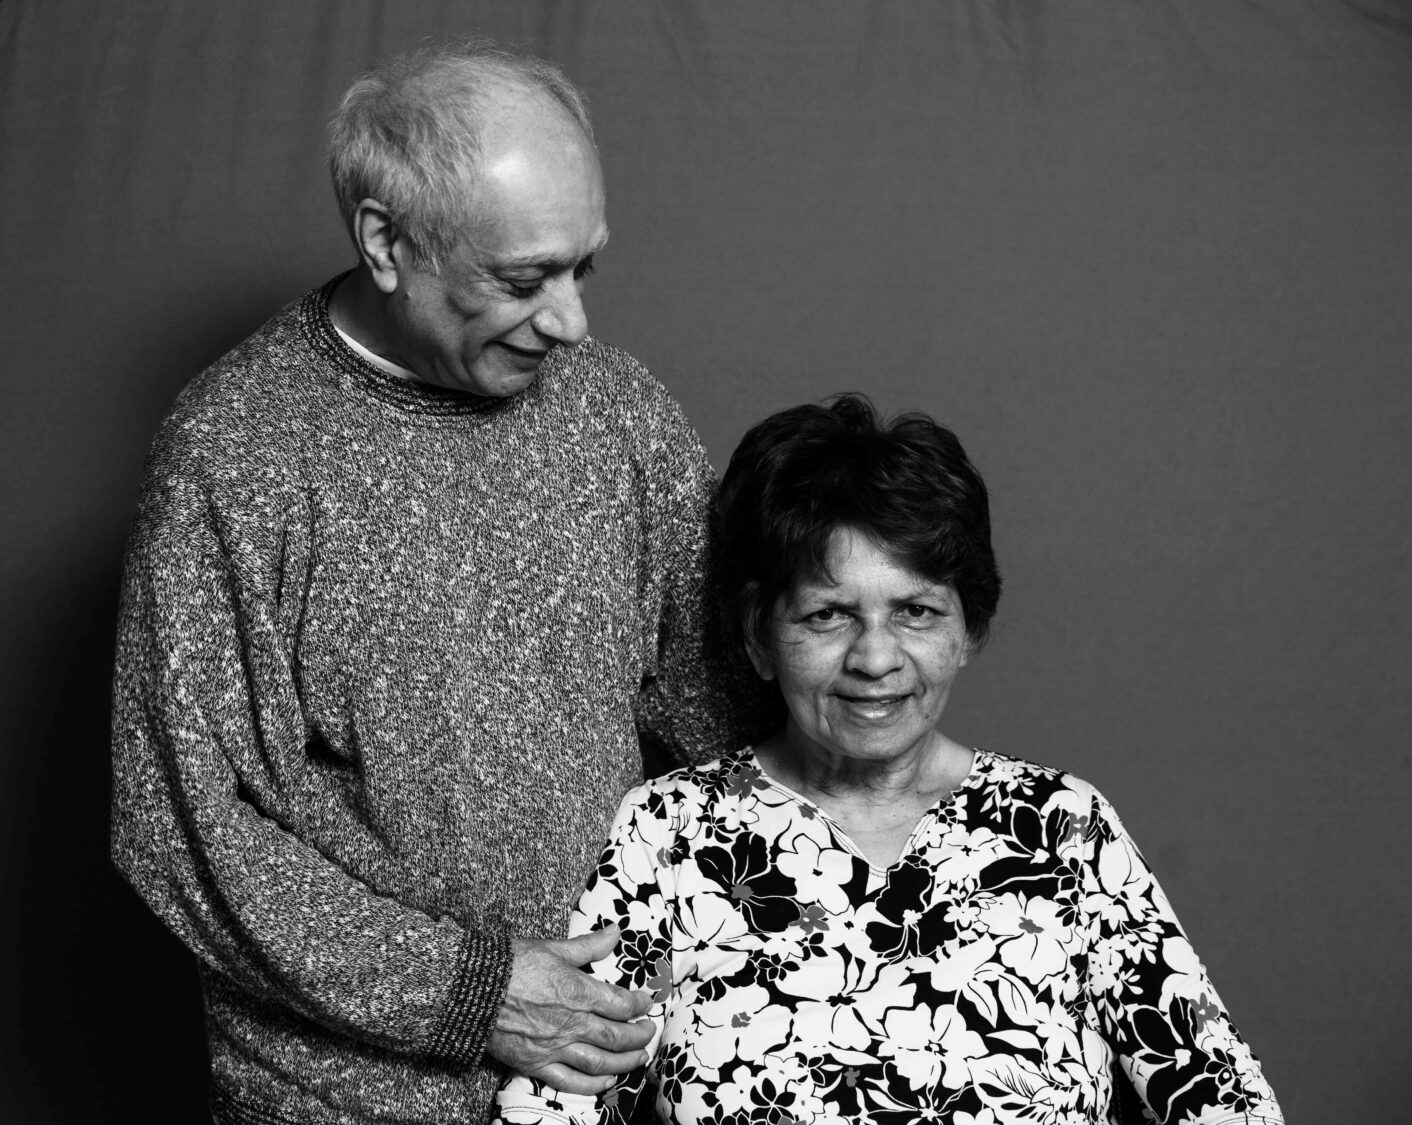 Ravinder Rehal, essential care partner at Providence, shares his experience caring for his wife who has Parkinson’s.